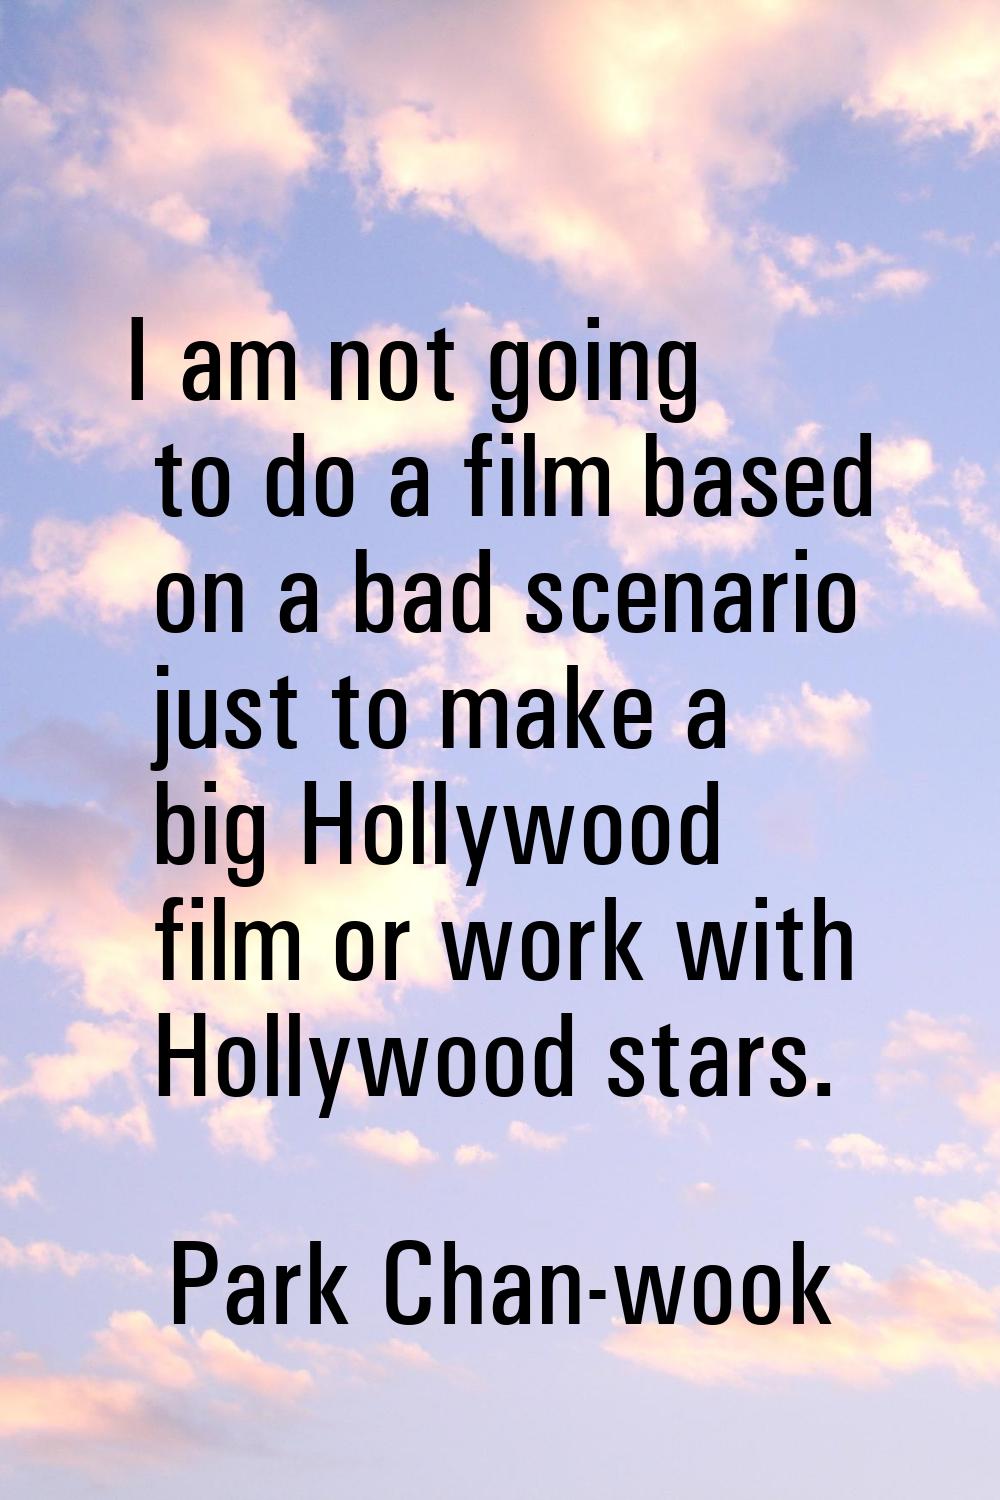 I am not going to do a film based on a bad scenario just to make a big Hollywood film or work with 